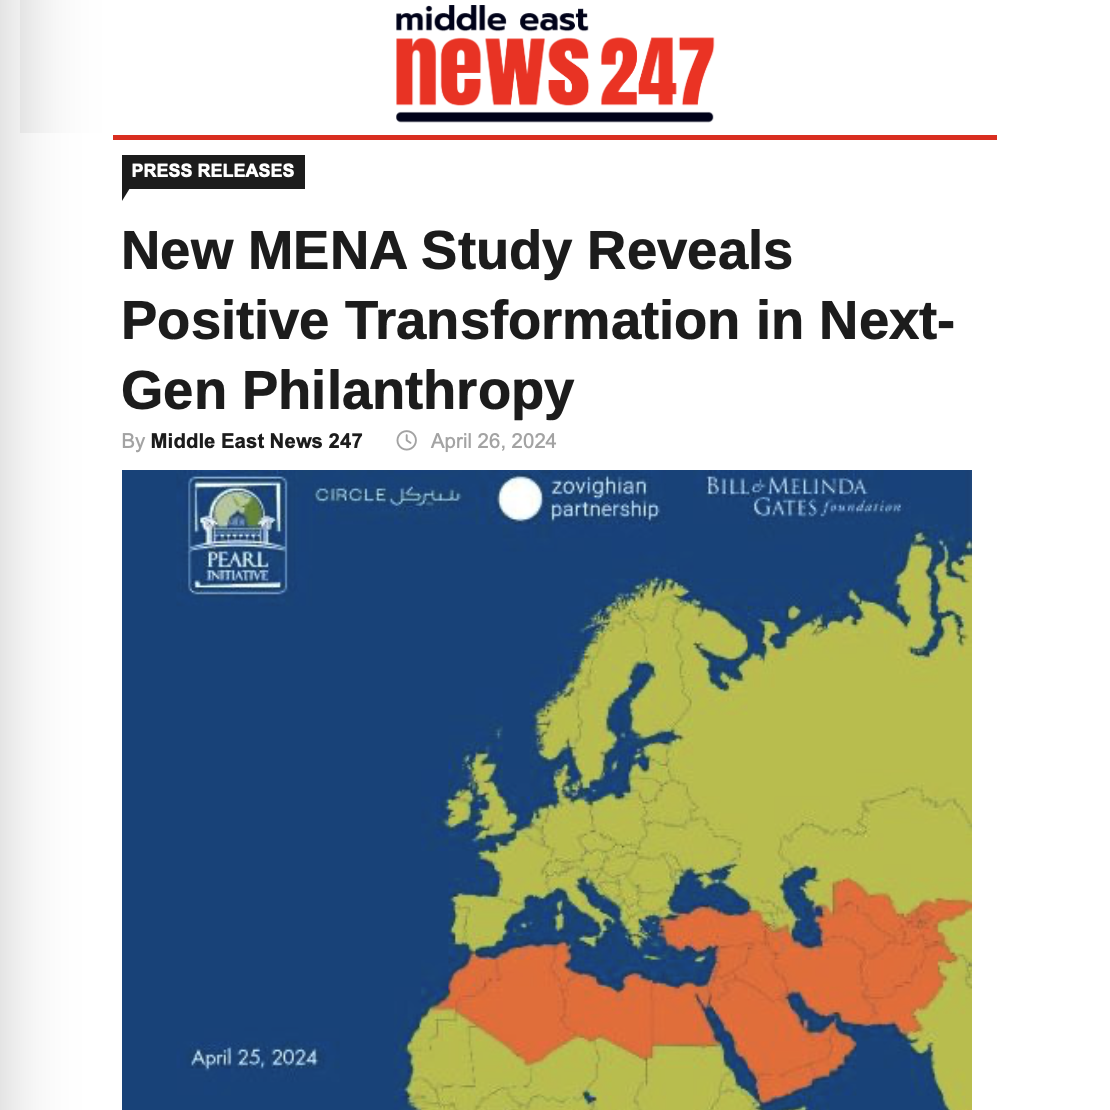 A newspaper article about a new mena study reveals positive transformation in next gen philanthropy